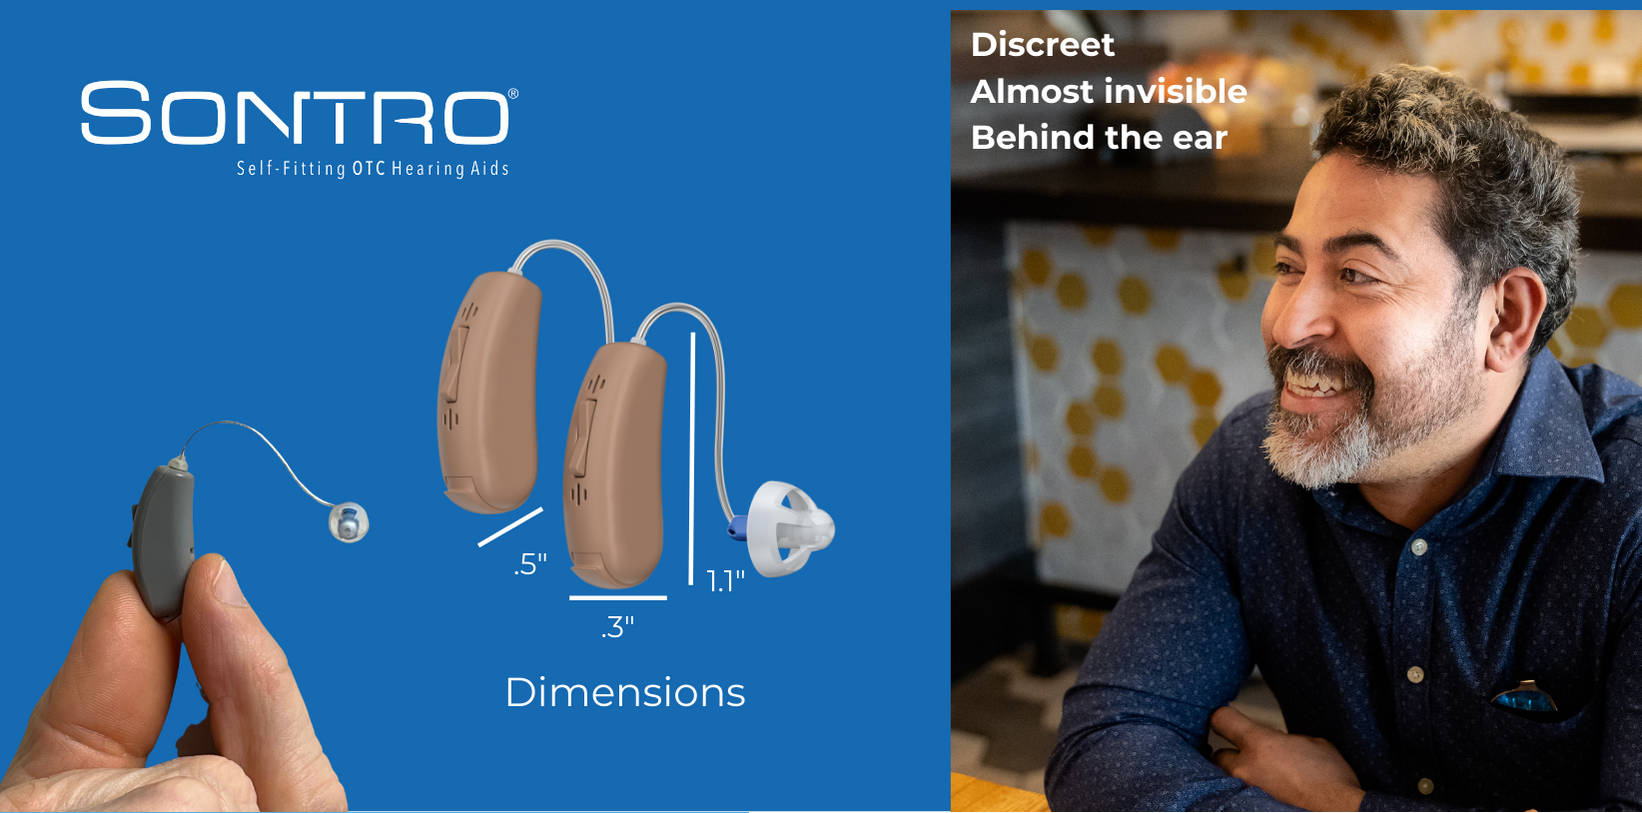 Dimensions of Discreet Sontro Self-Fitting OTC Hearing Aids 